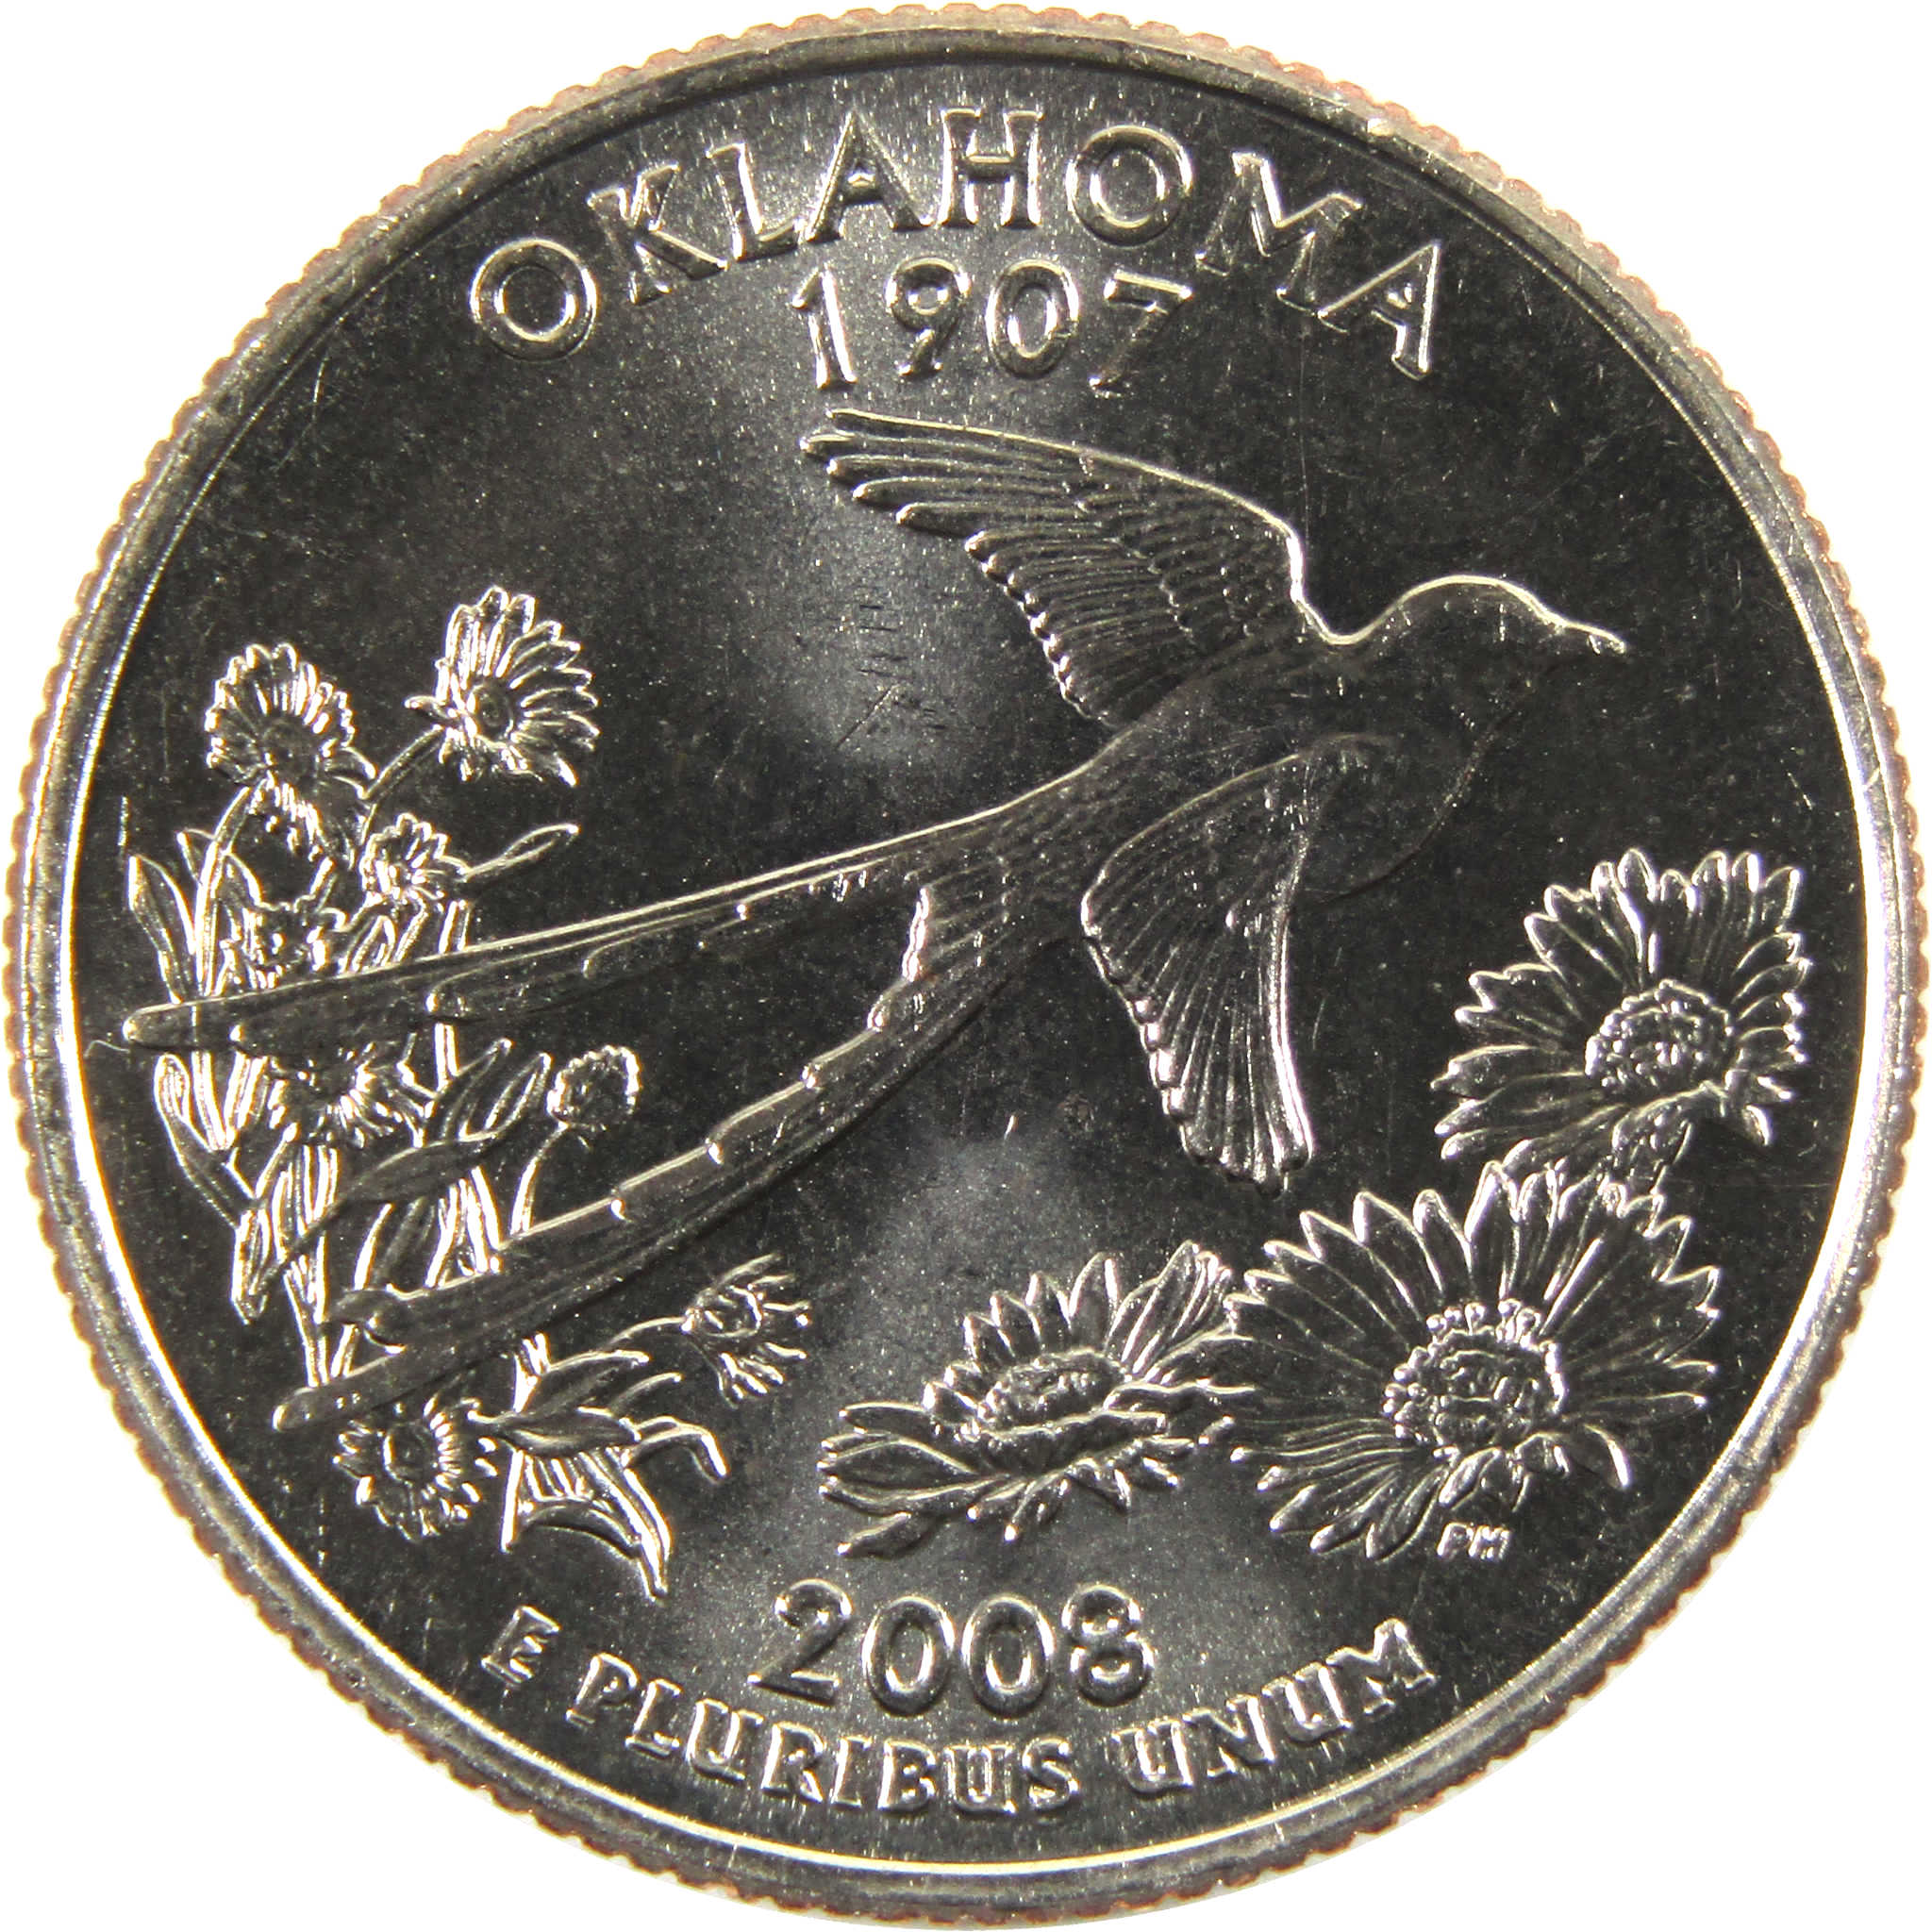 2008 D Oklahoma State Quarter BU Uncirculated Clad 25c Coin